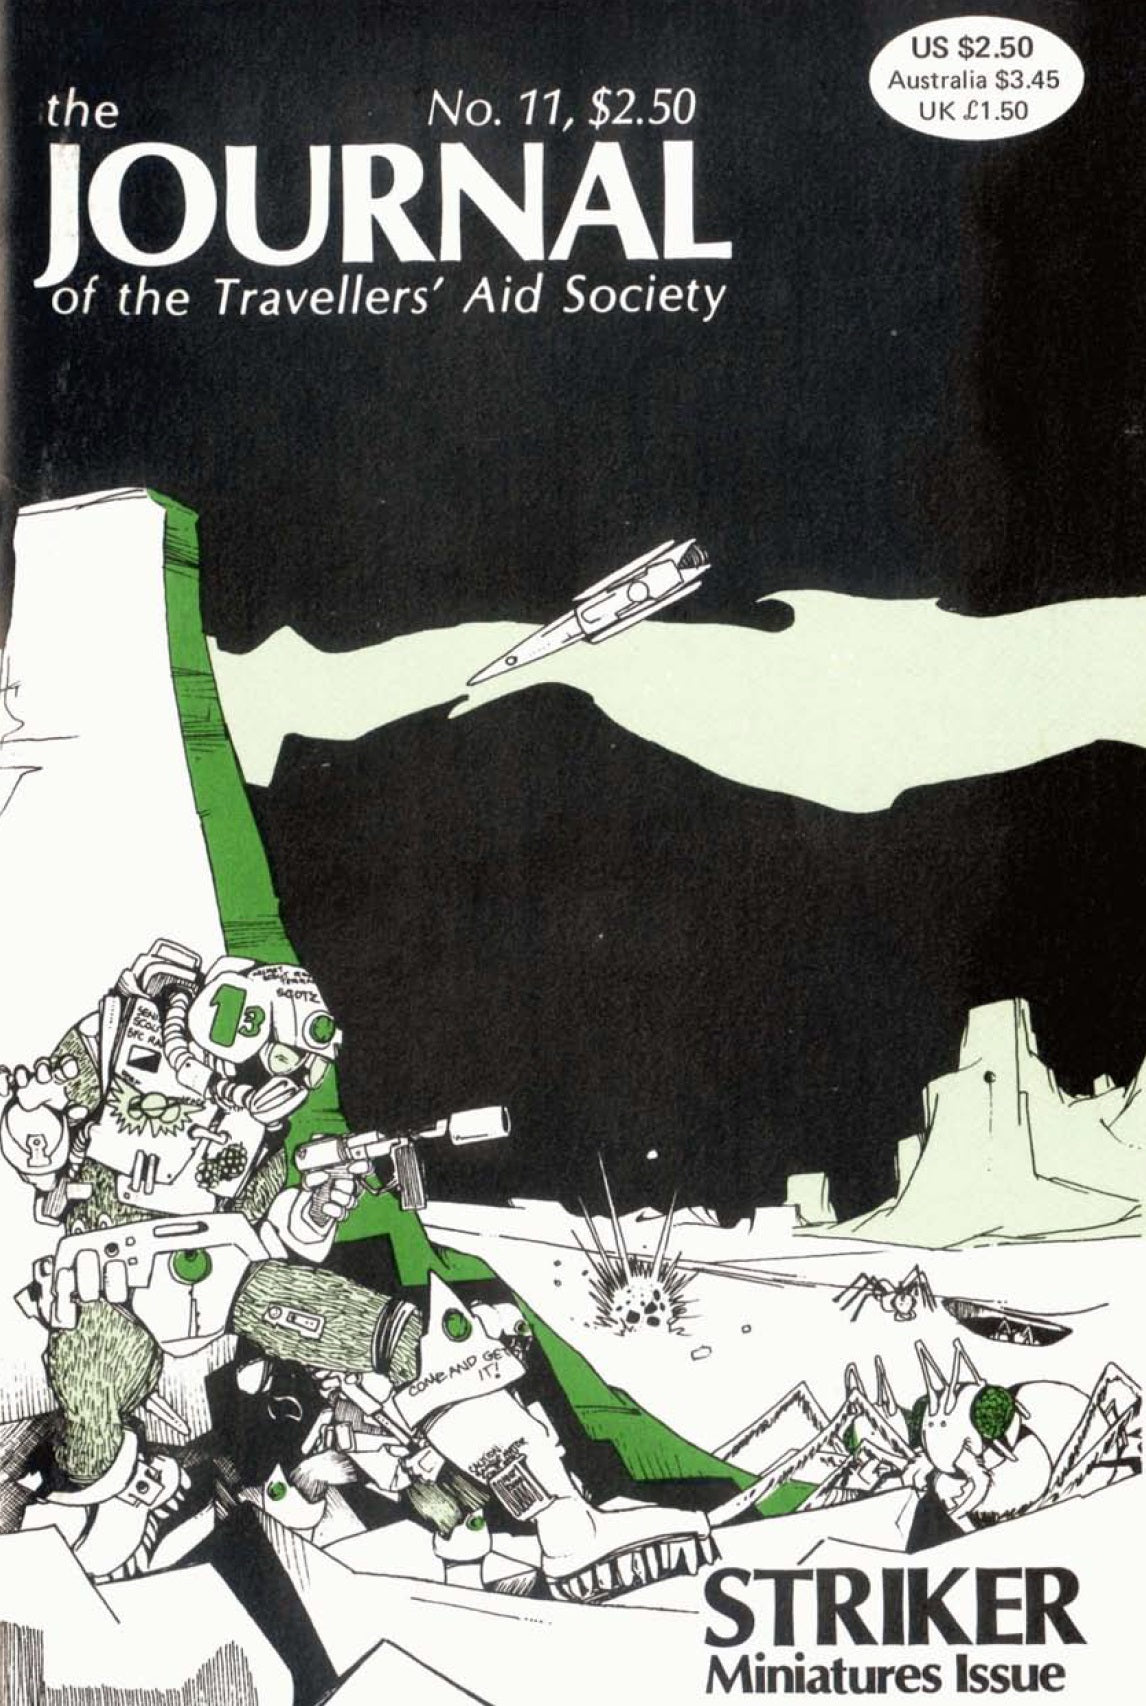 Journal of the Travellers' Aid Society No.11 ebook